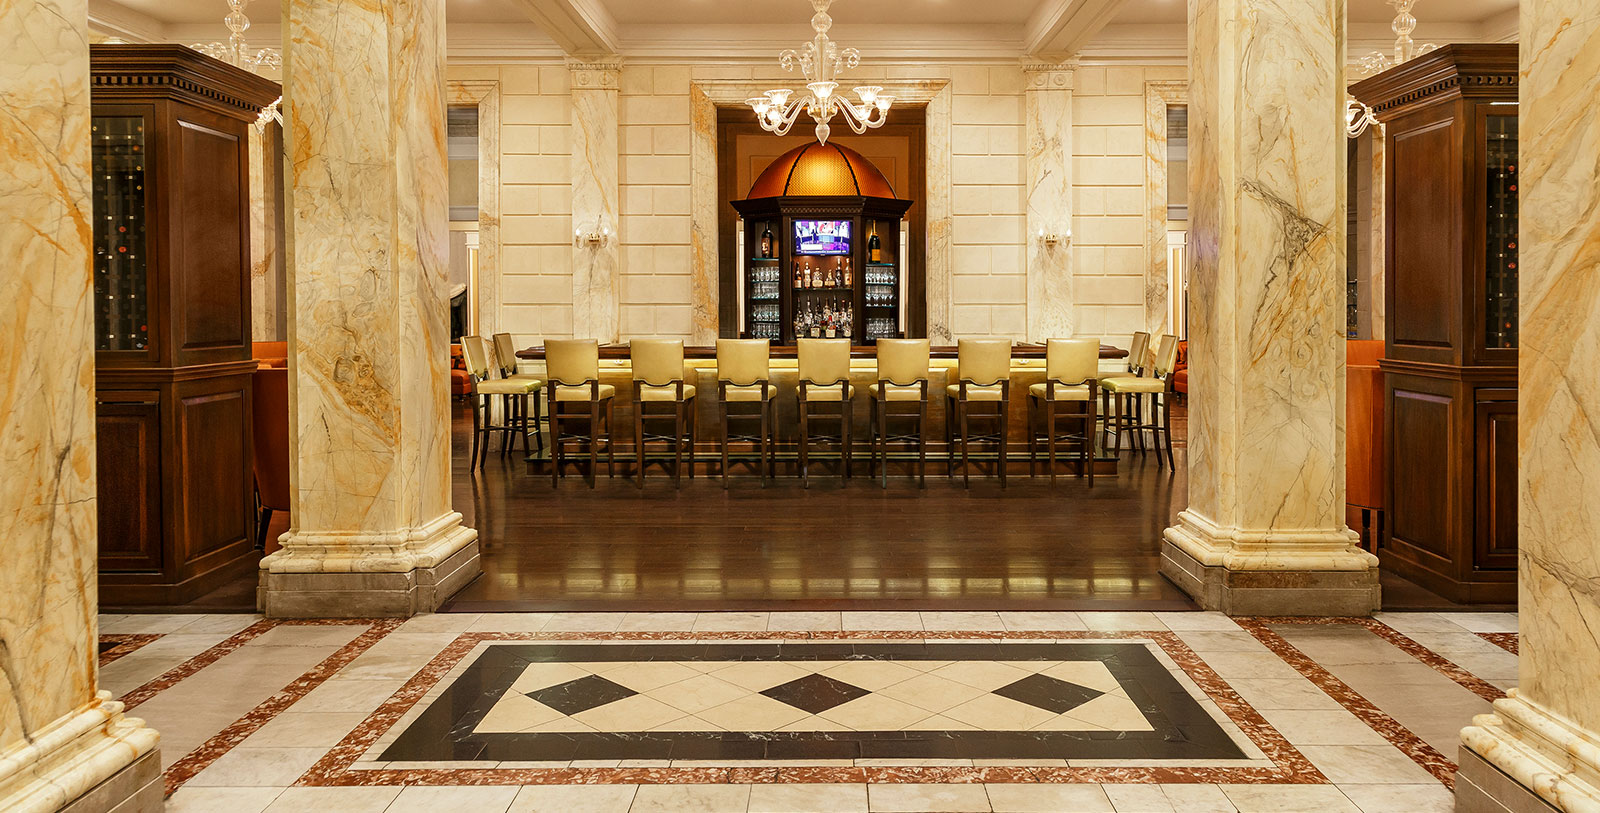 Image of Lobby The Jefferson Hotel, 1895, Member of Historic Hotels of America, in Richmond, Virginia, Explore